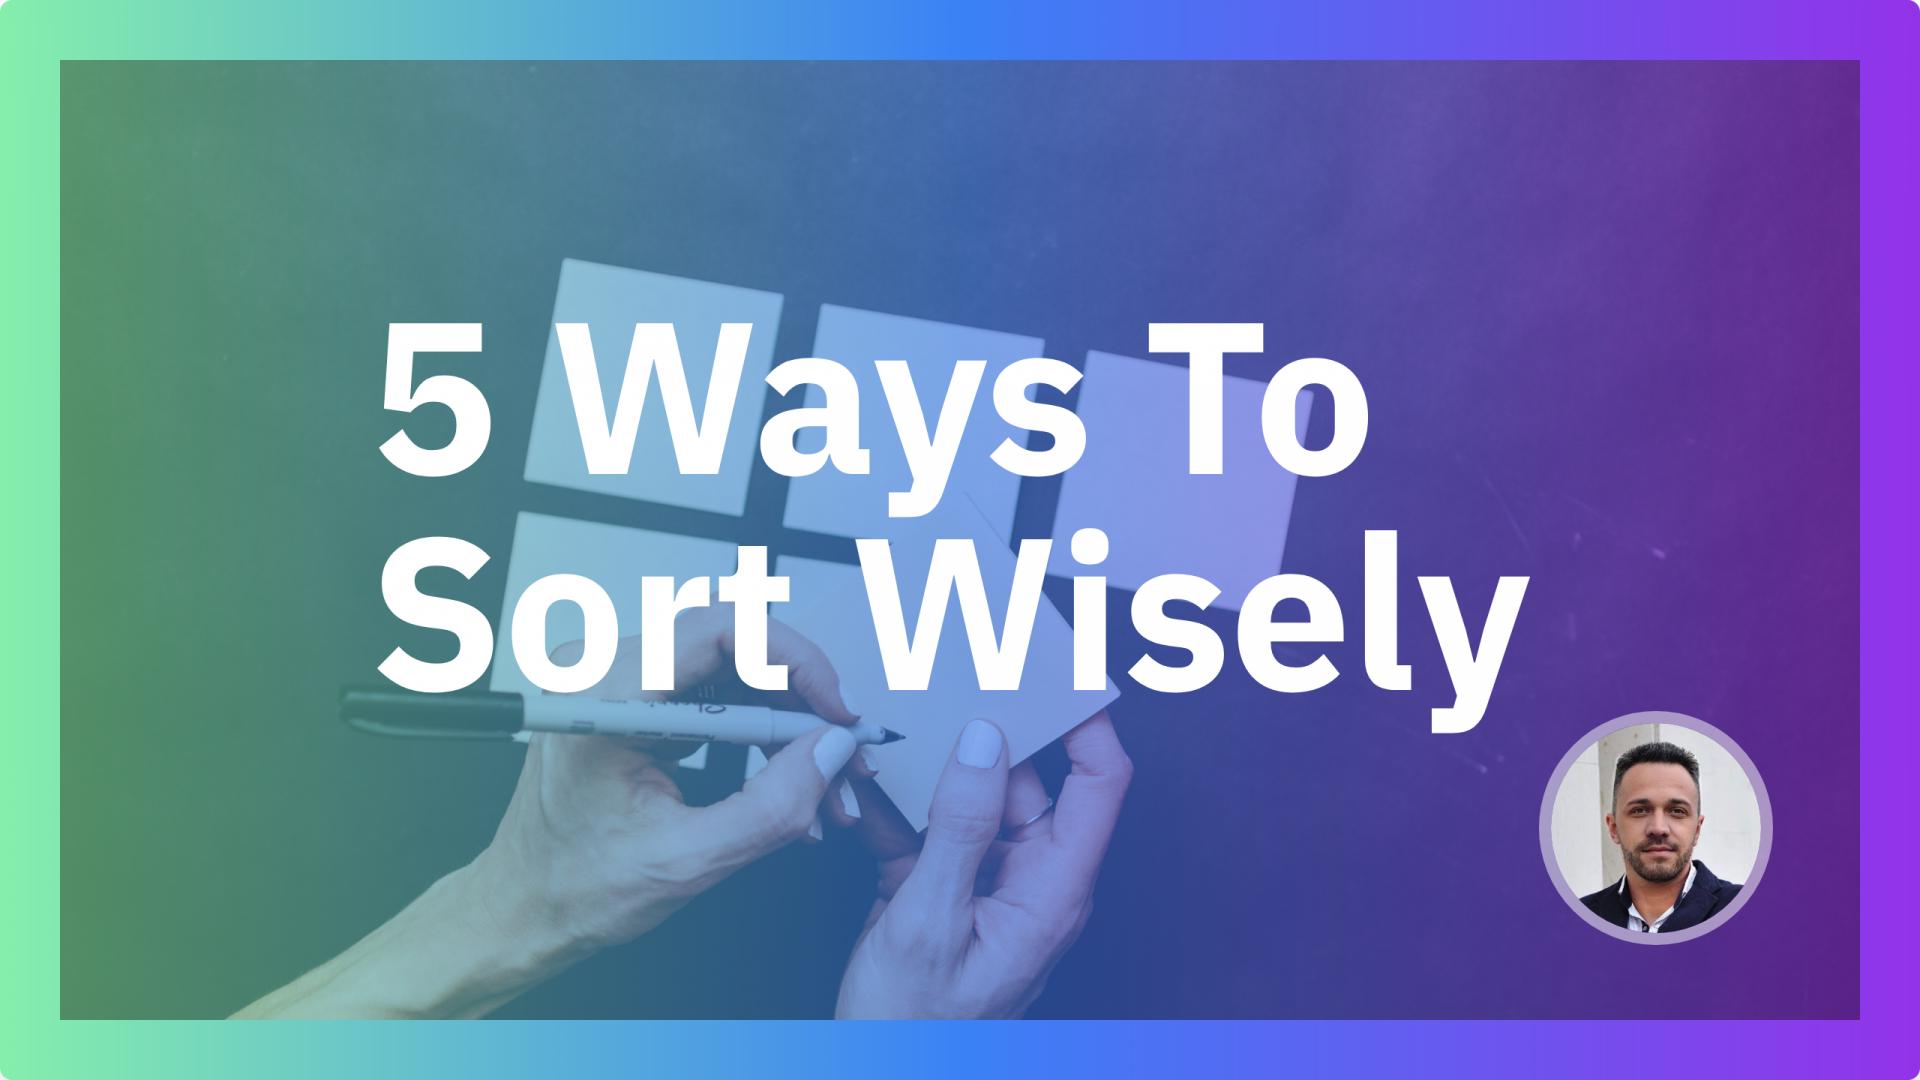 5 Ways To Sort Wisely